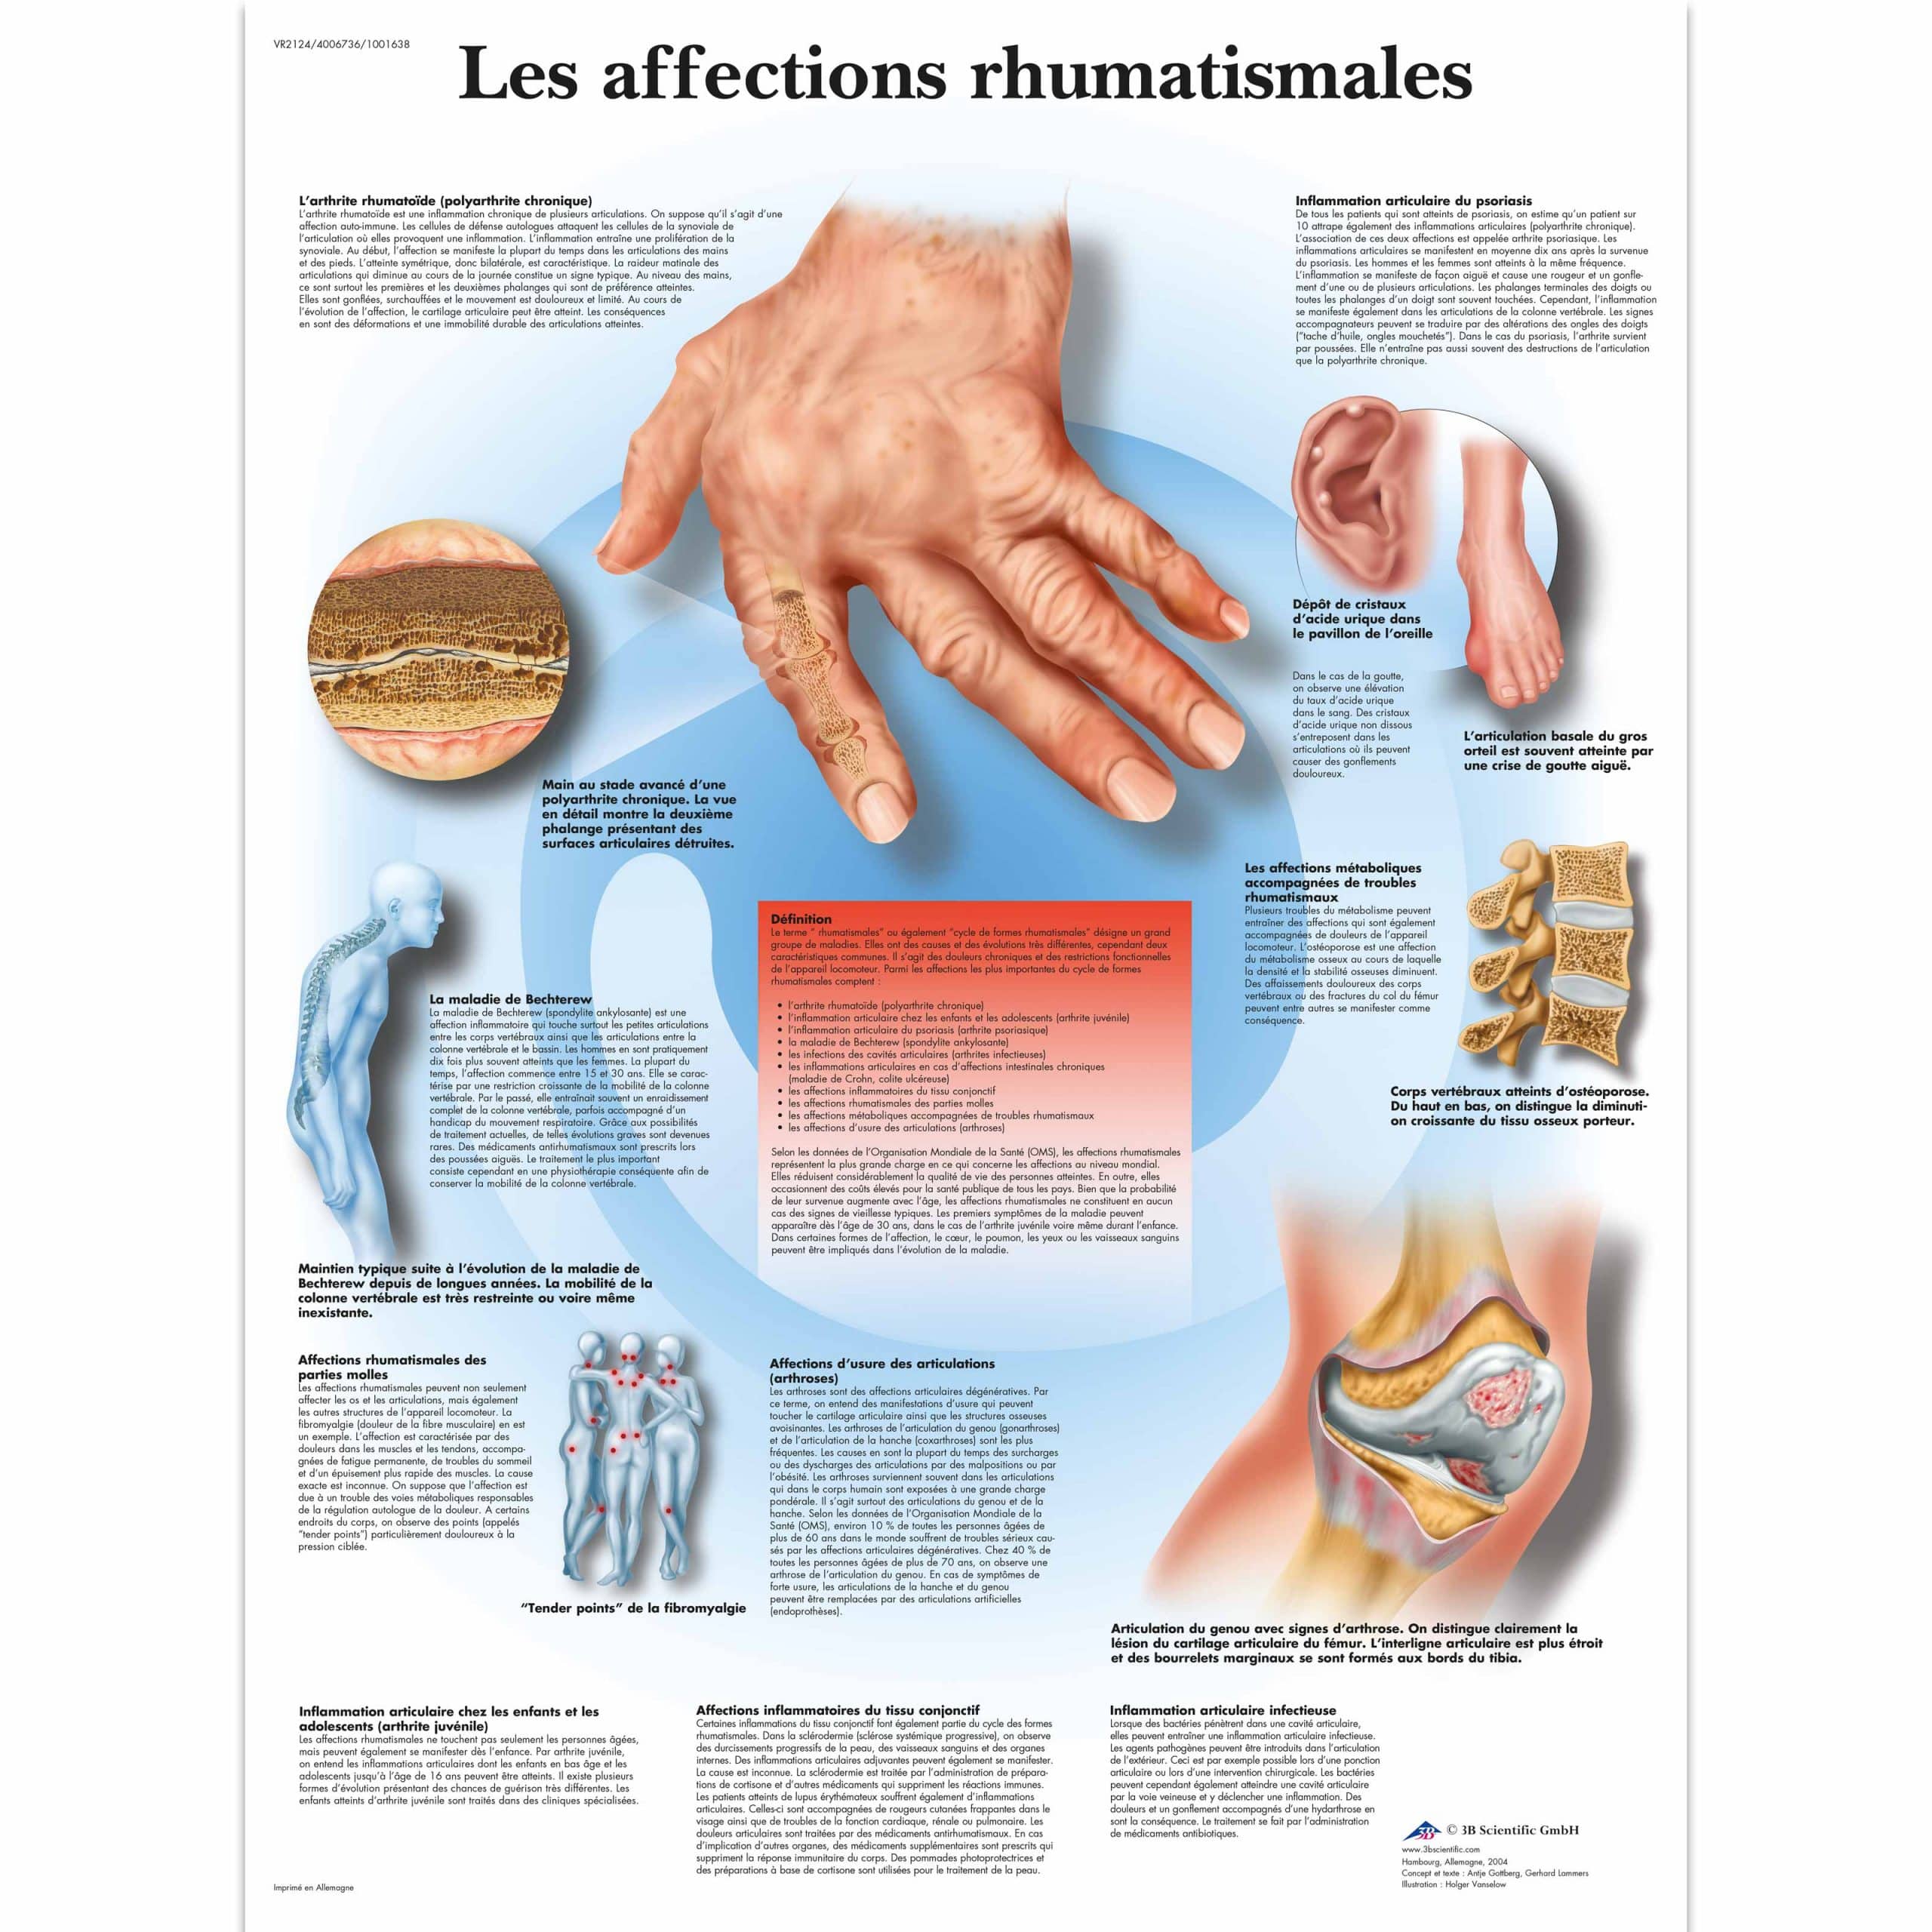 Les affections rhumatismales